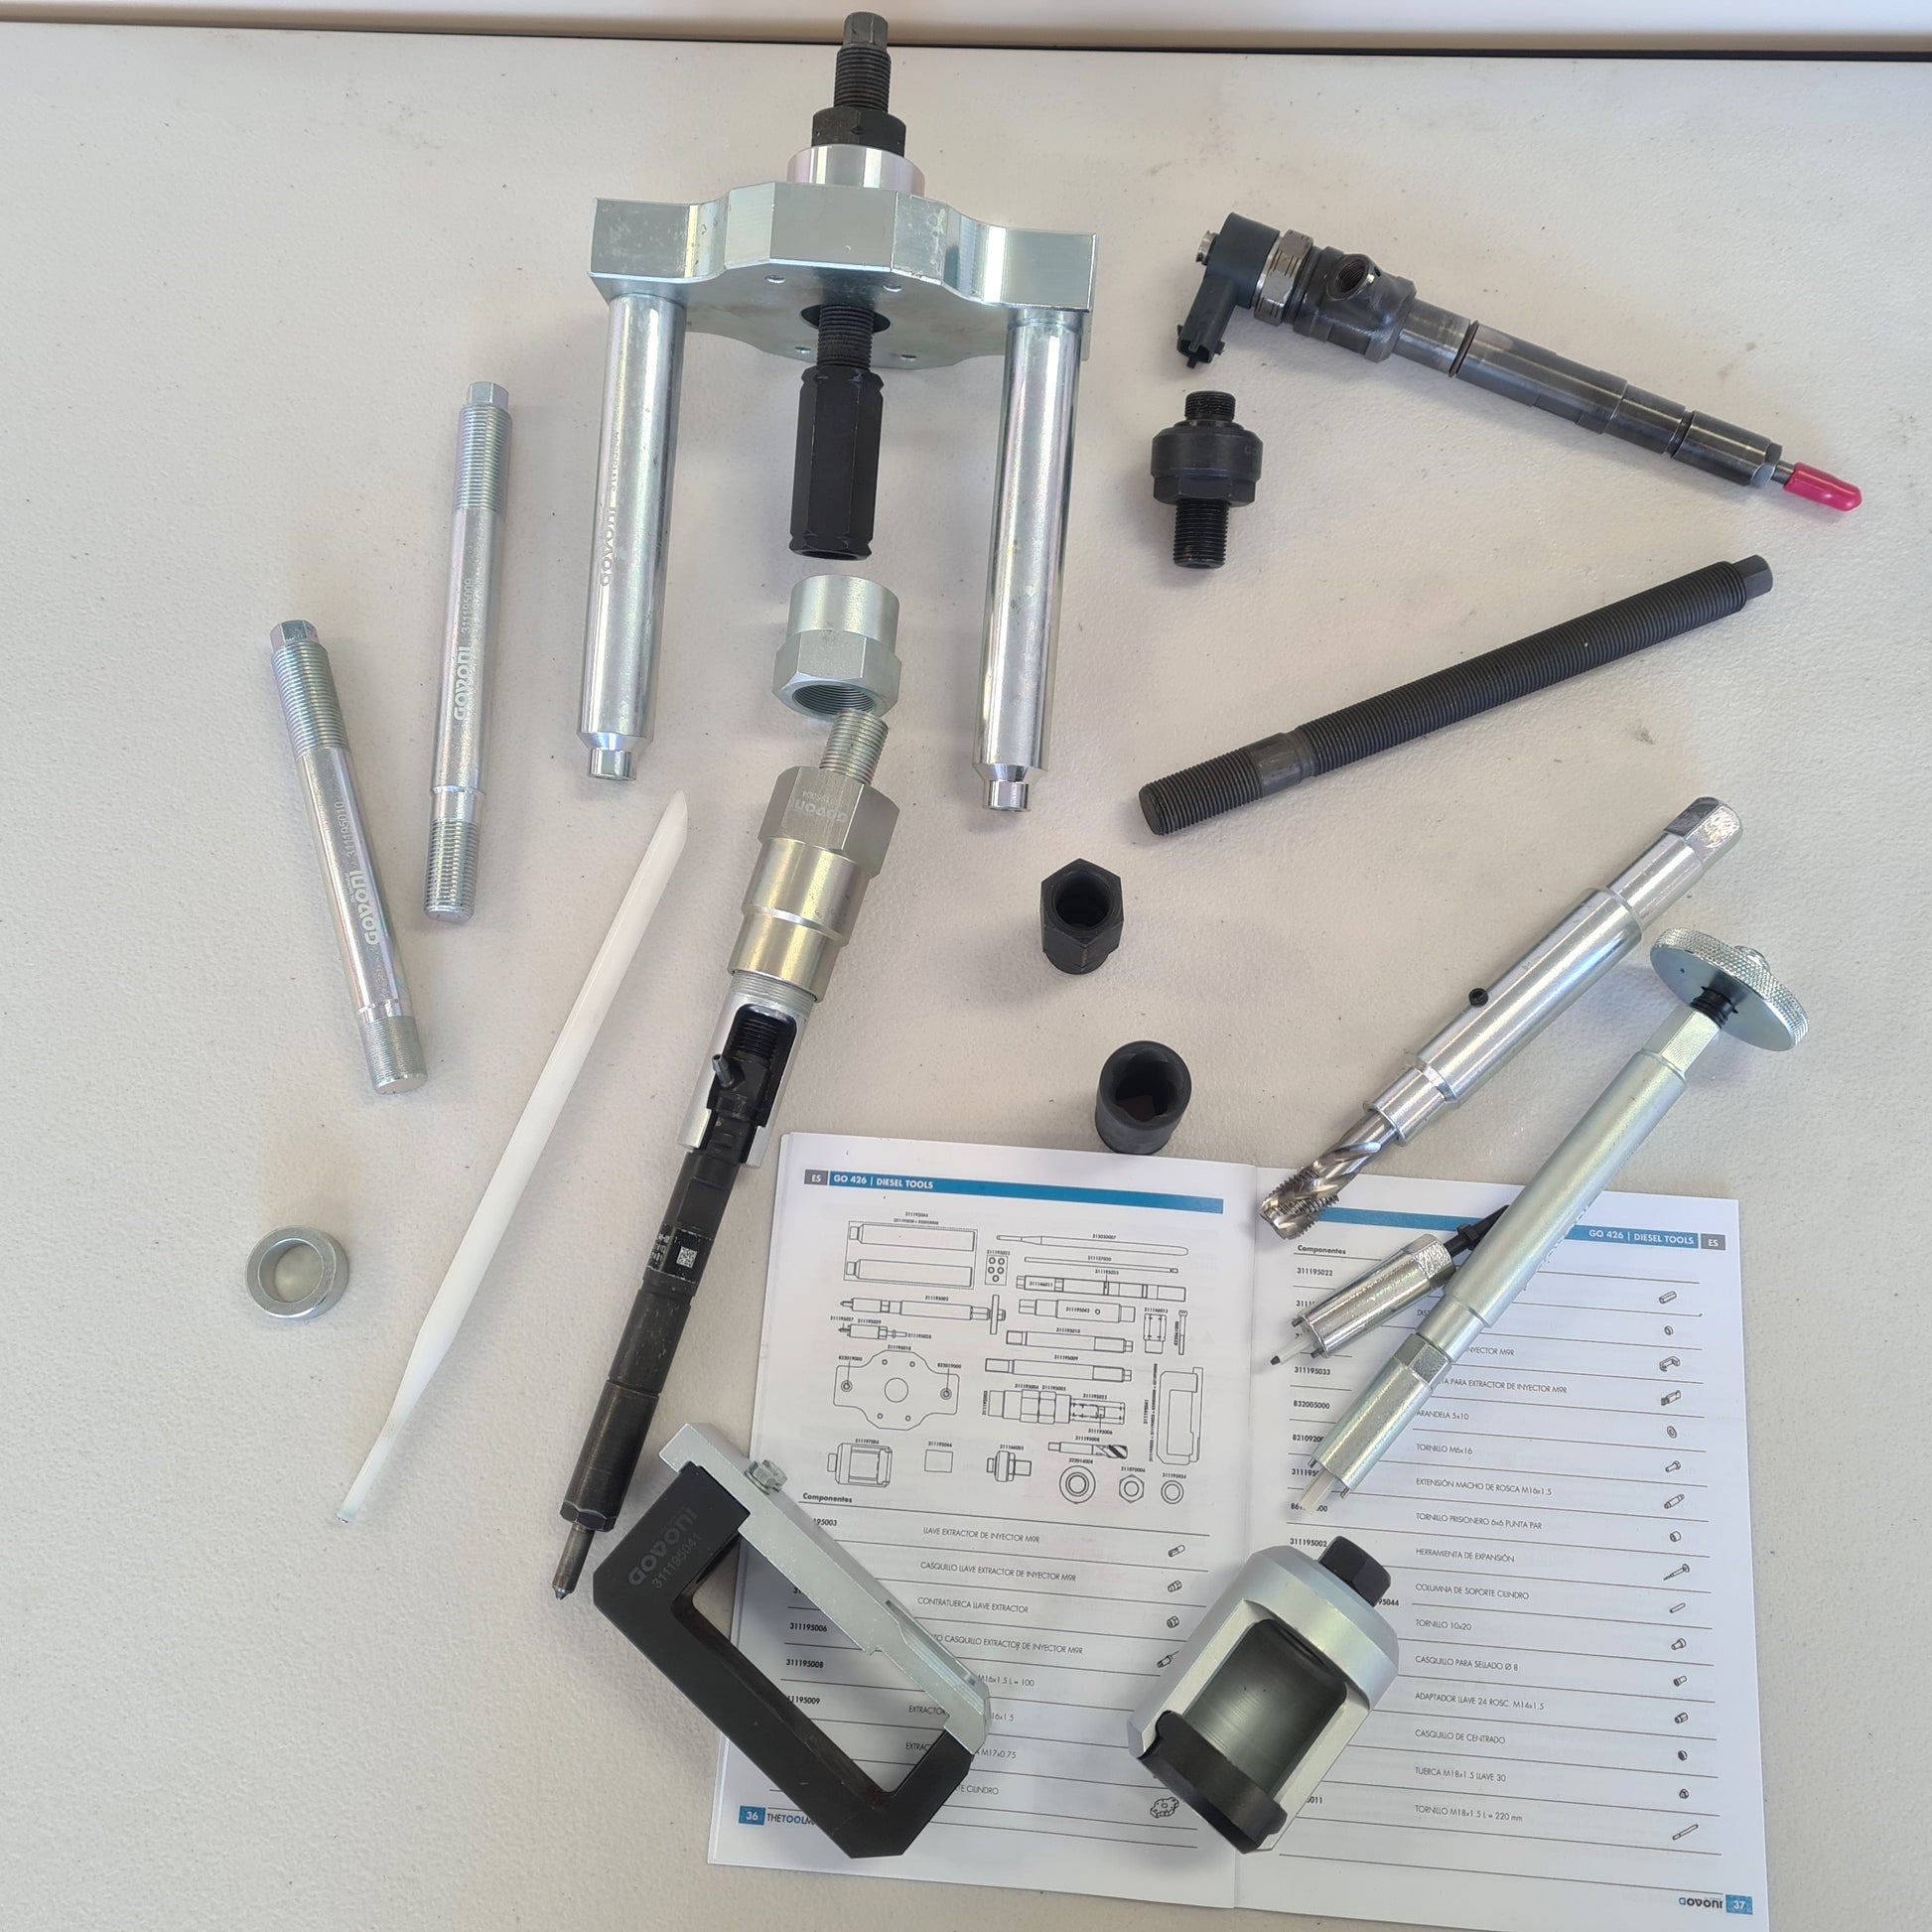 Govoni Multi-Stage Seized Injector Removing Kit for M9R 2.0 DCI Engines includes multiple adapters  - from Specialist Tools Australia